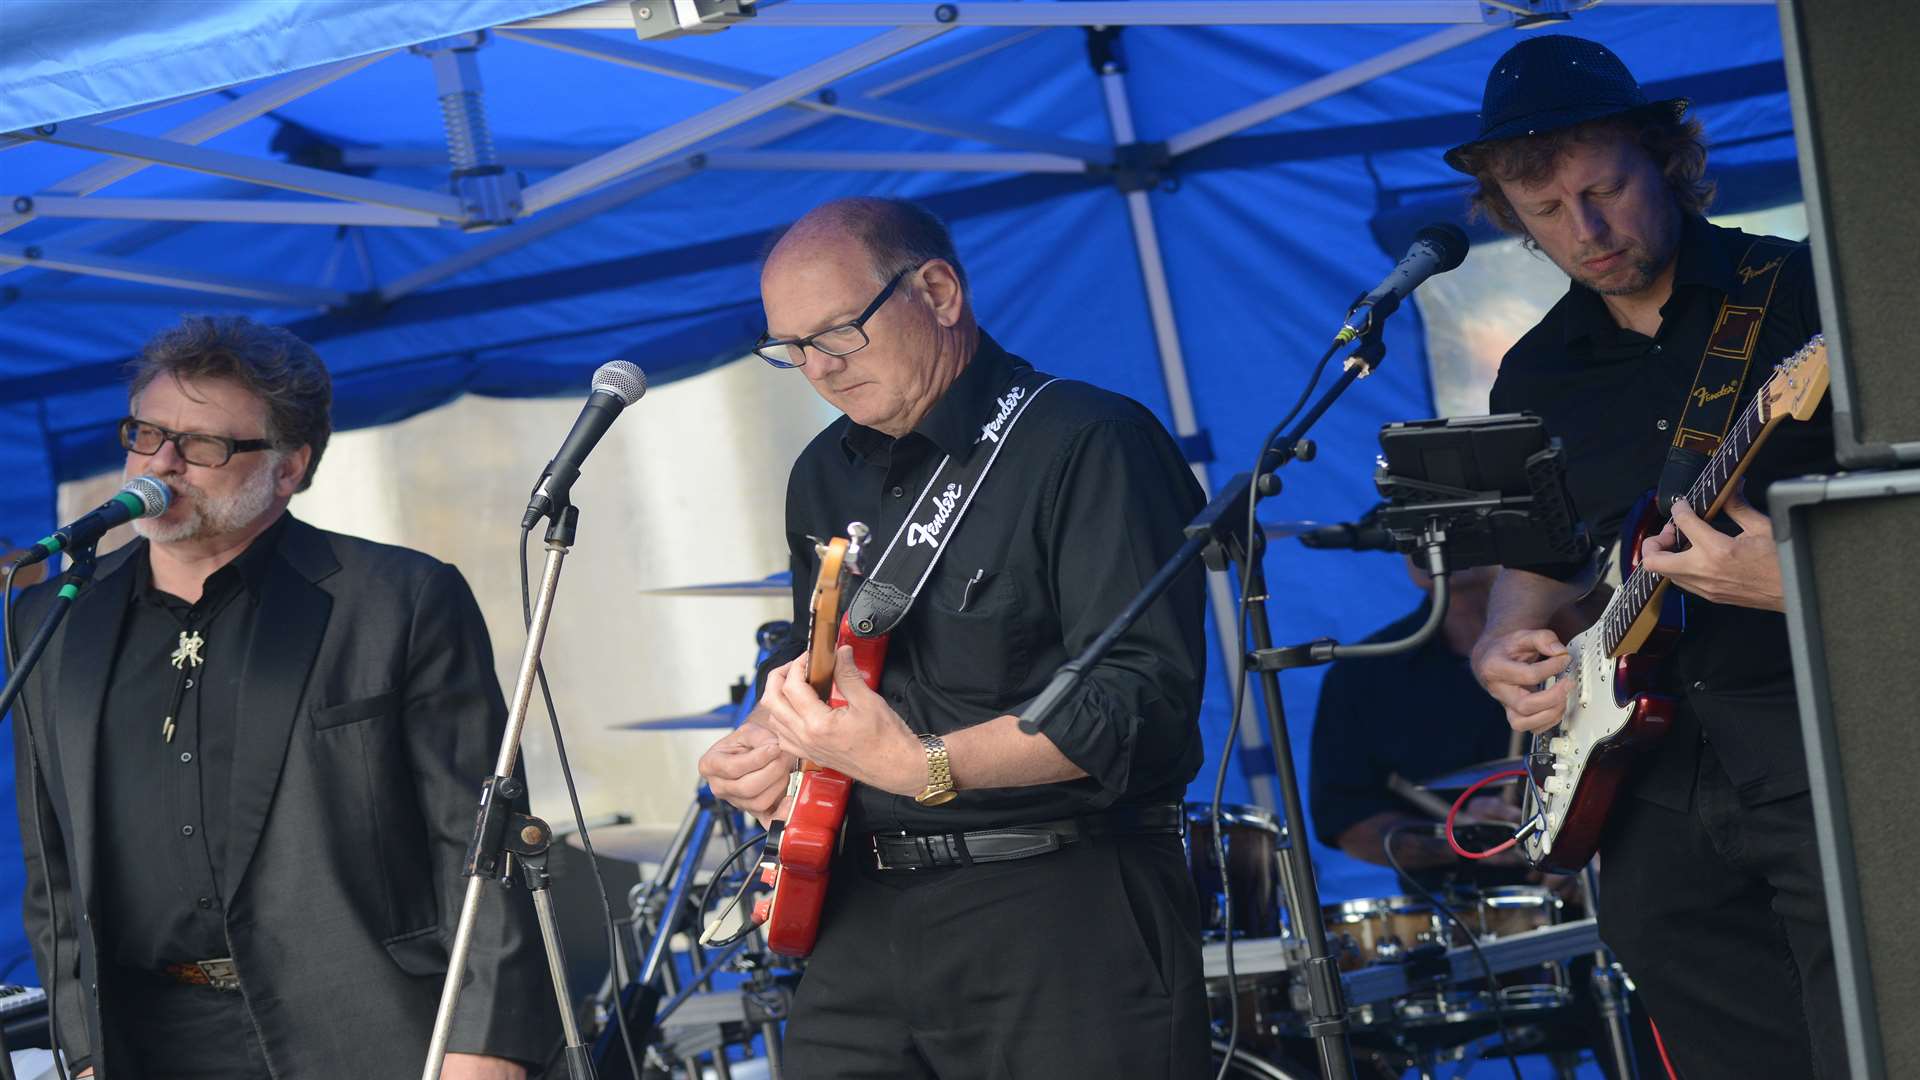 John Nurden and the Rockin' Decades at the classic car show held earlier this month